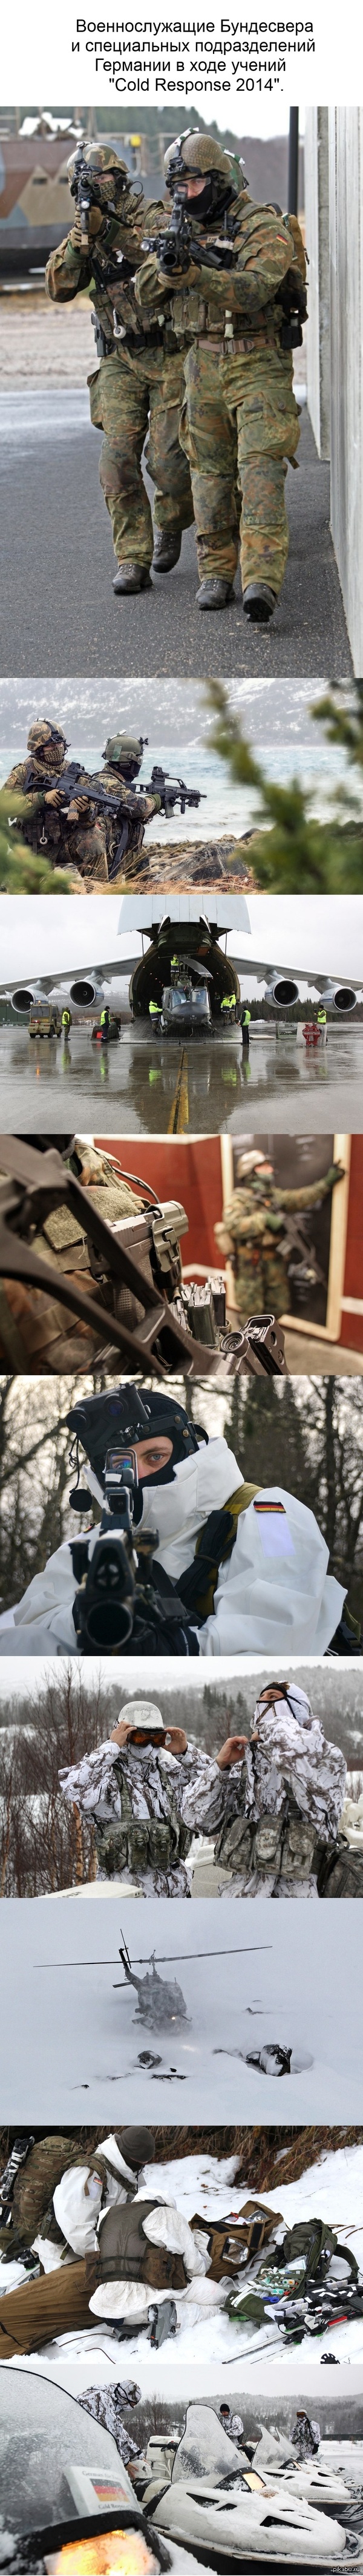          &quot;Cold Response 2014&quot;.    vk.com/military_and_police